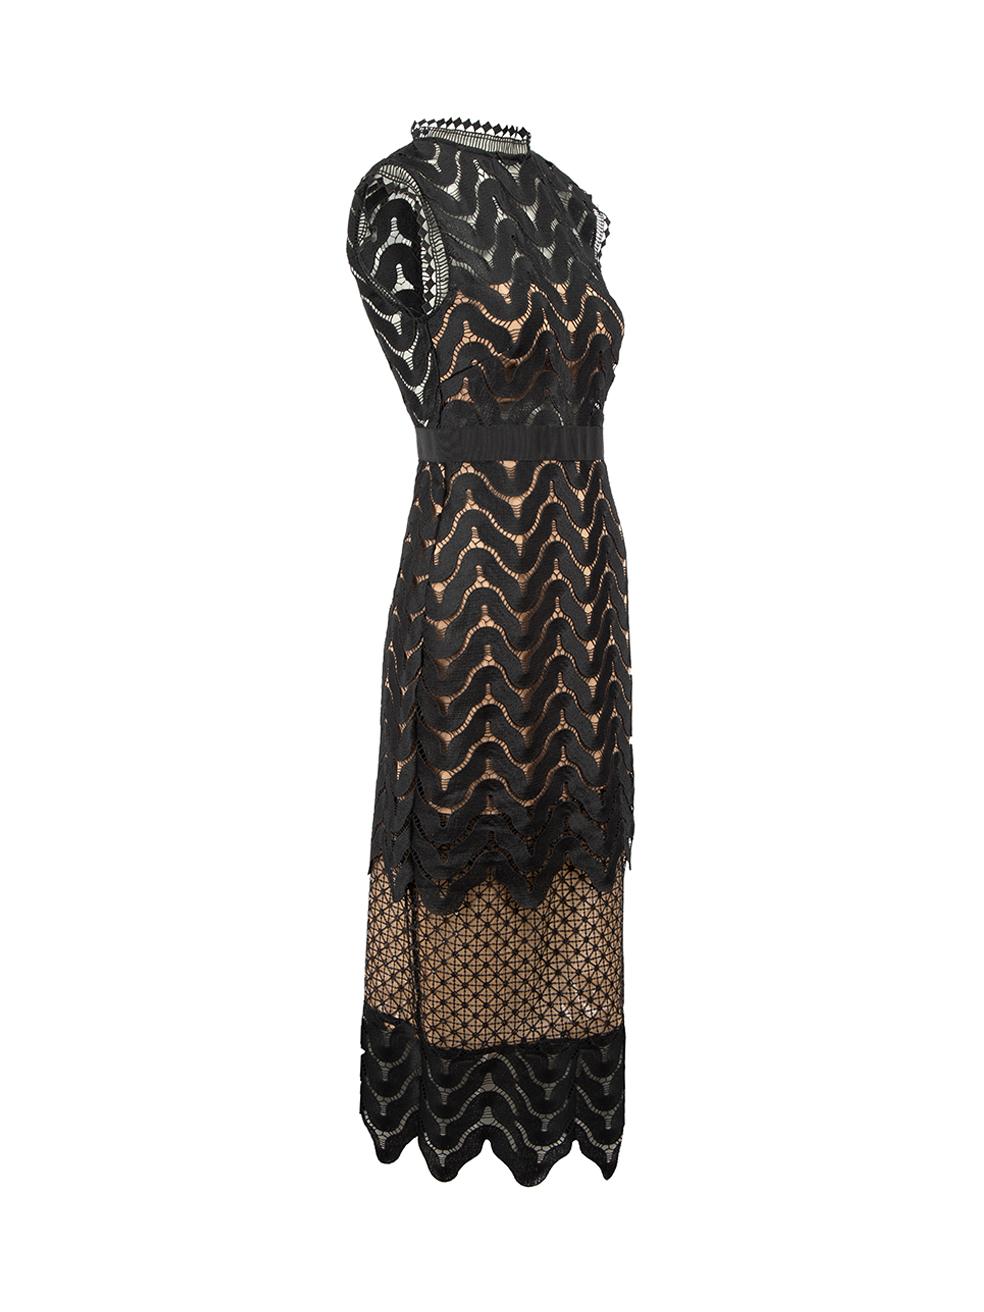 CONDITION is Very good. Hardly any visible wear to dress is evident on this used Self-Portrait designer resale item.



Details


Black

Polyester

Dress

Lace

Sleeveless

Mock neck

Open back

Back zip fastening

Sequin embellished